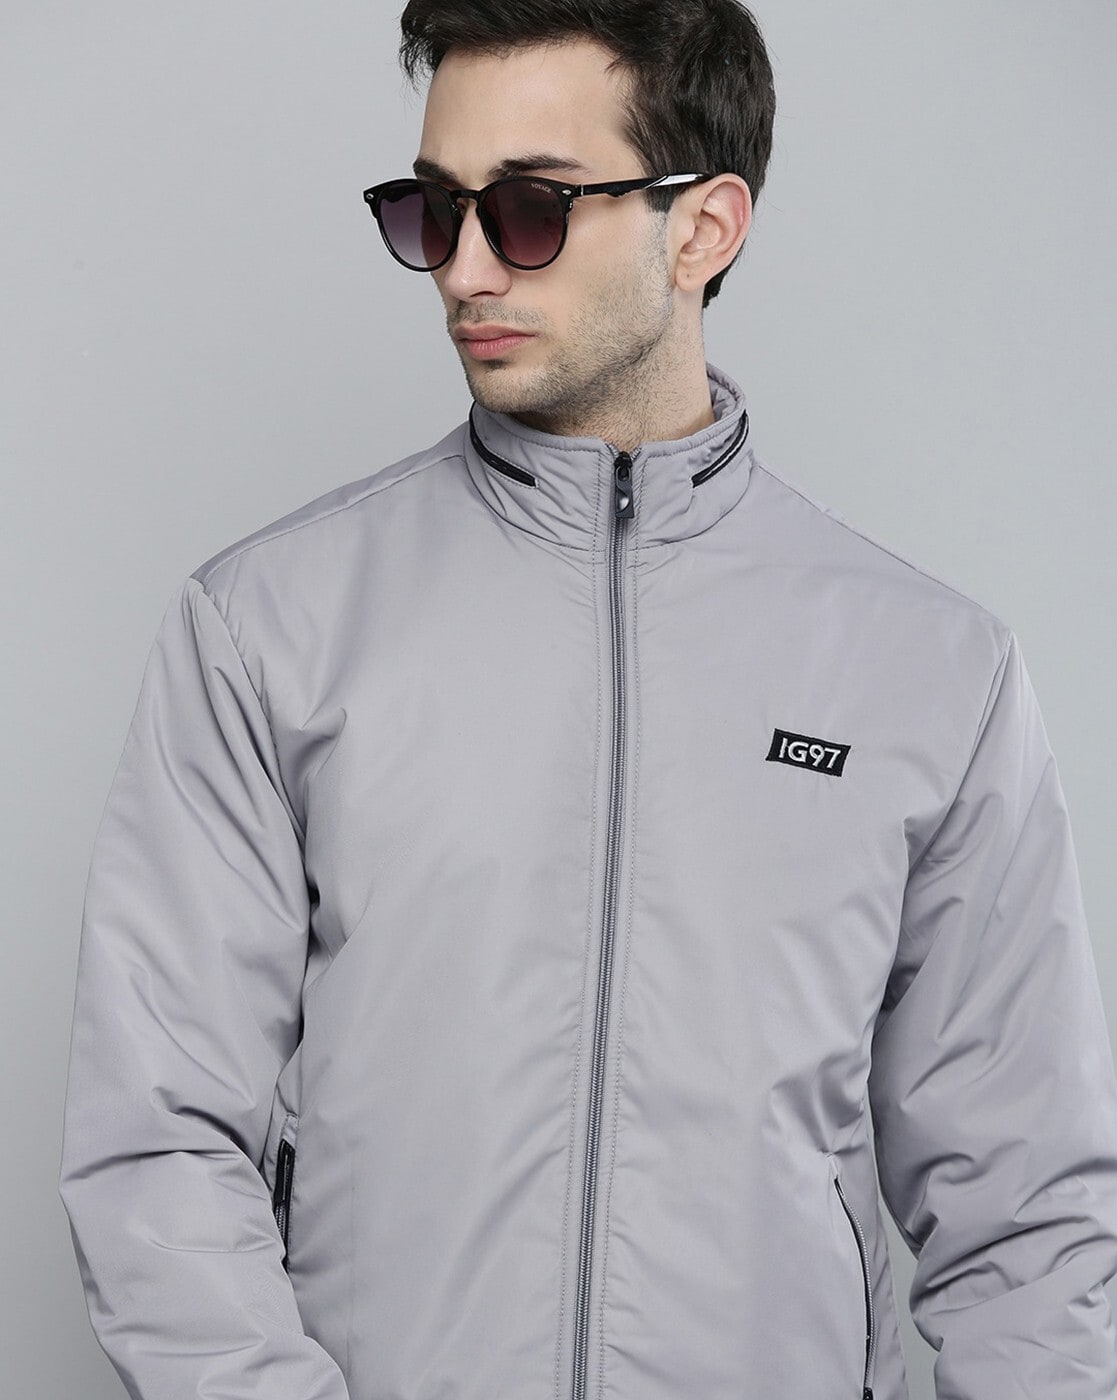 The Indian Garage Co Jackets upto 75% Off starting @474 - THE DEAL APP |  Get Best Deals, Discounts, Offers, Coupons for Shopping in India